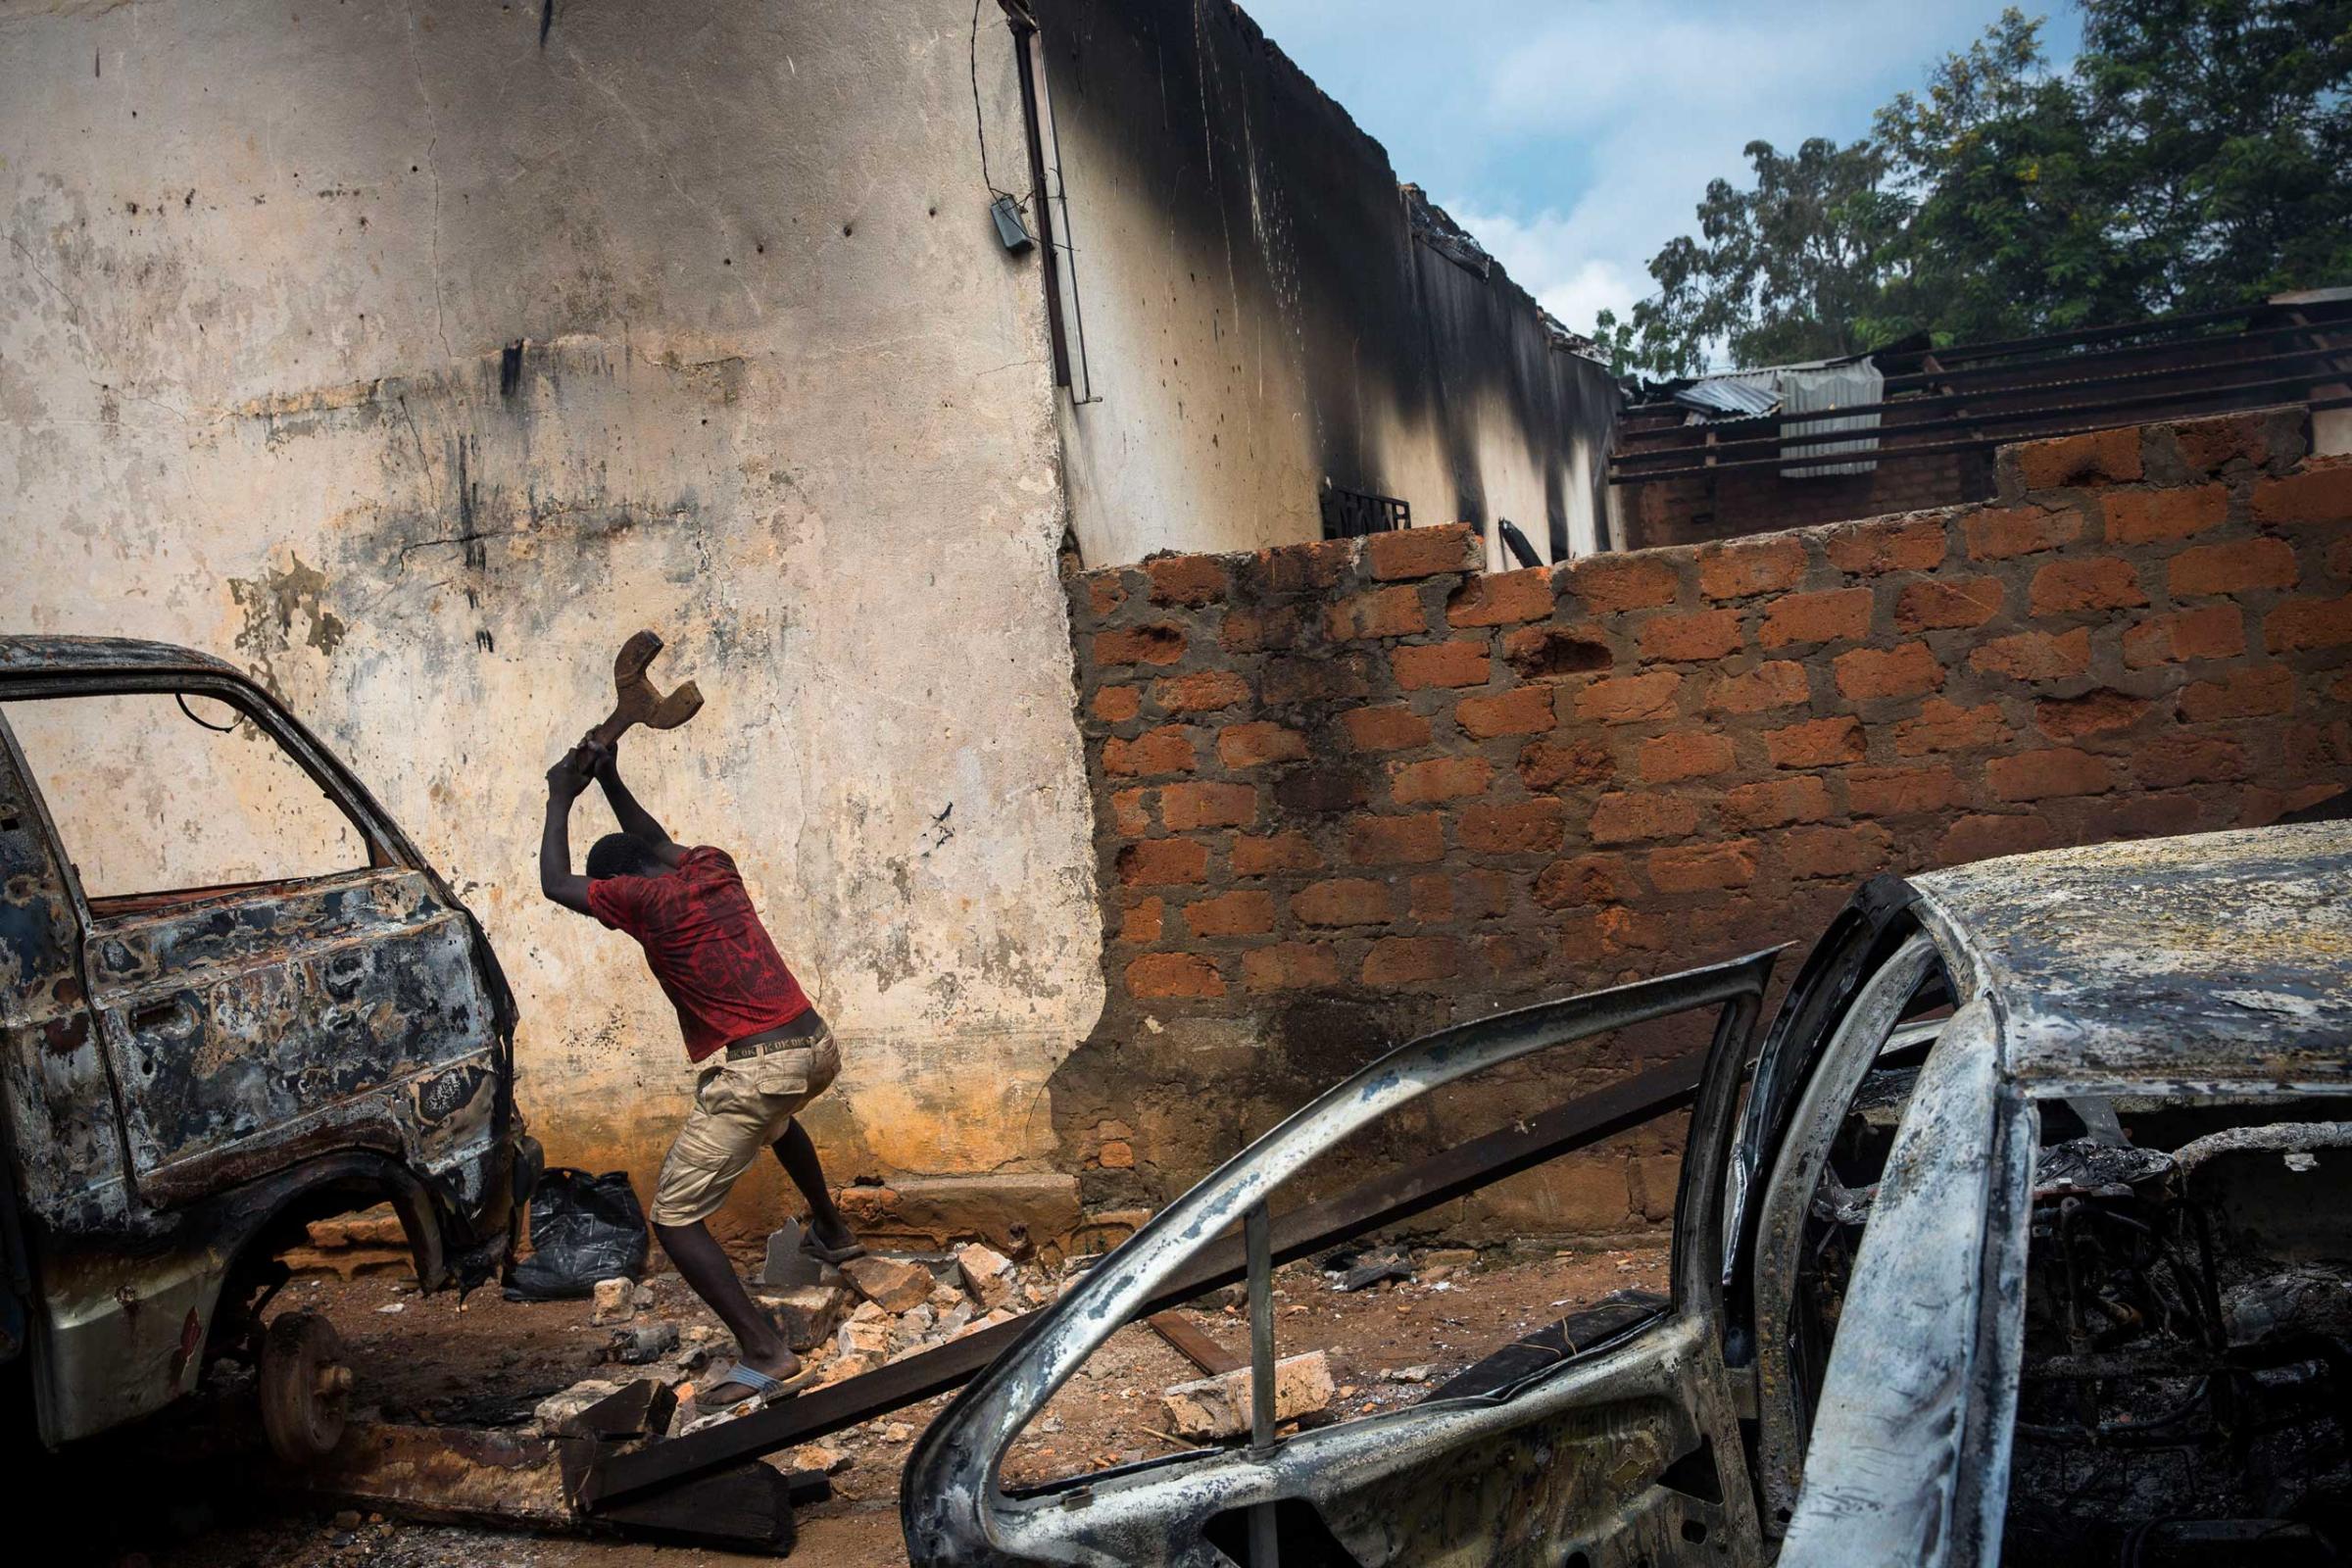 Dec. 10, 2013: A Christian man destroying burnt out cars in rage, next to a looted mosque that had been set on fire in Bangui.